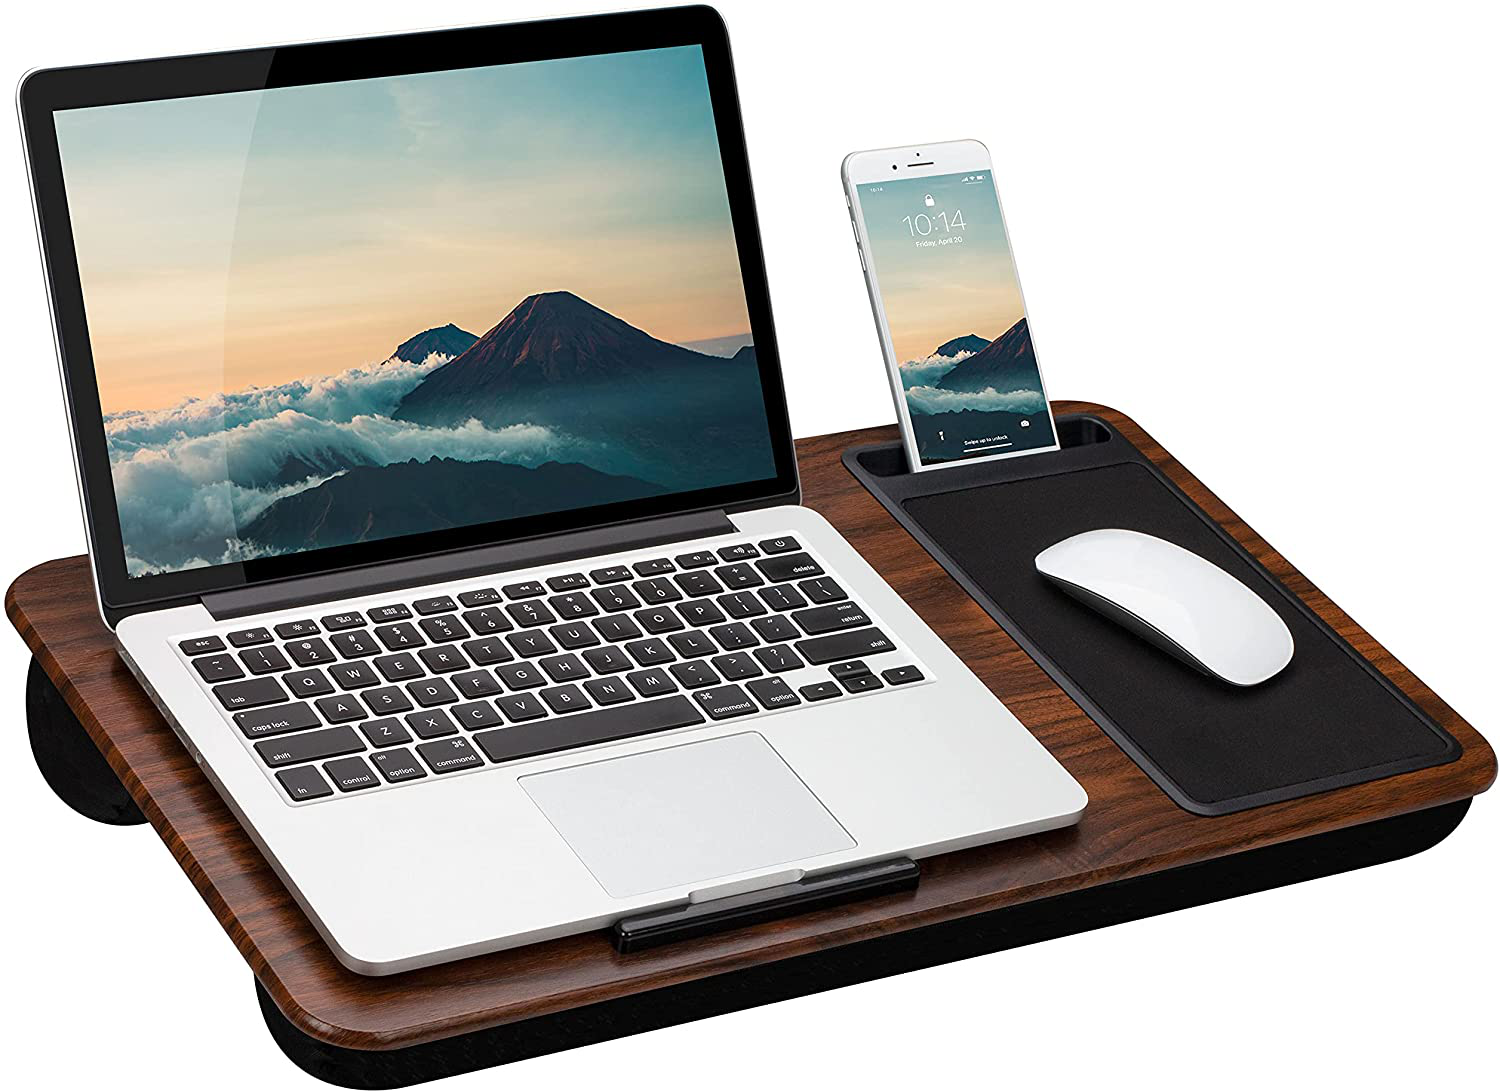 LapGear Home Office Lap Desk with Device Ledge, Mouse Pad, and Phone Holder